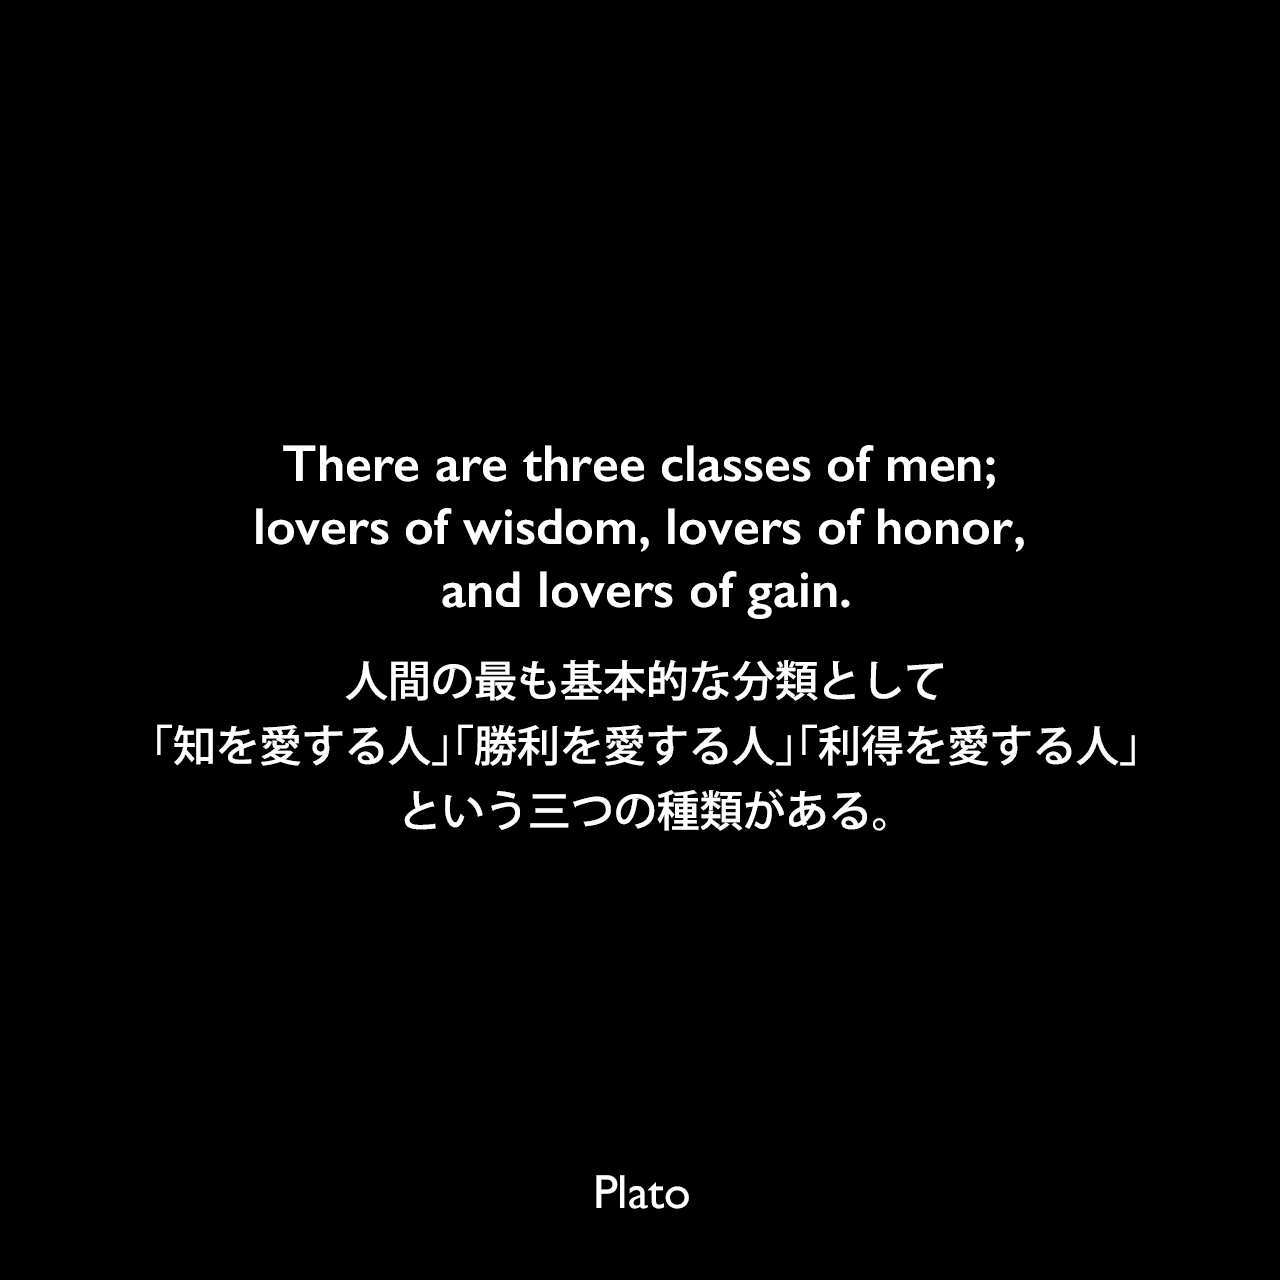 There are three classes of men; lovers of wisdom, lovers of honor, and lovers of gain.人間の最も基本的な分類として、「知を愛する人」「勝利を愛する人」「利得を愛する人」という三つの種類がある。Plato